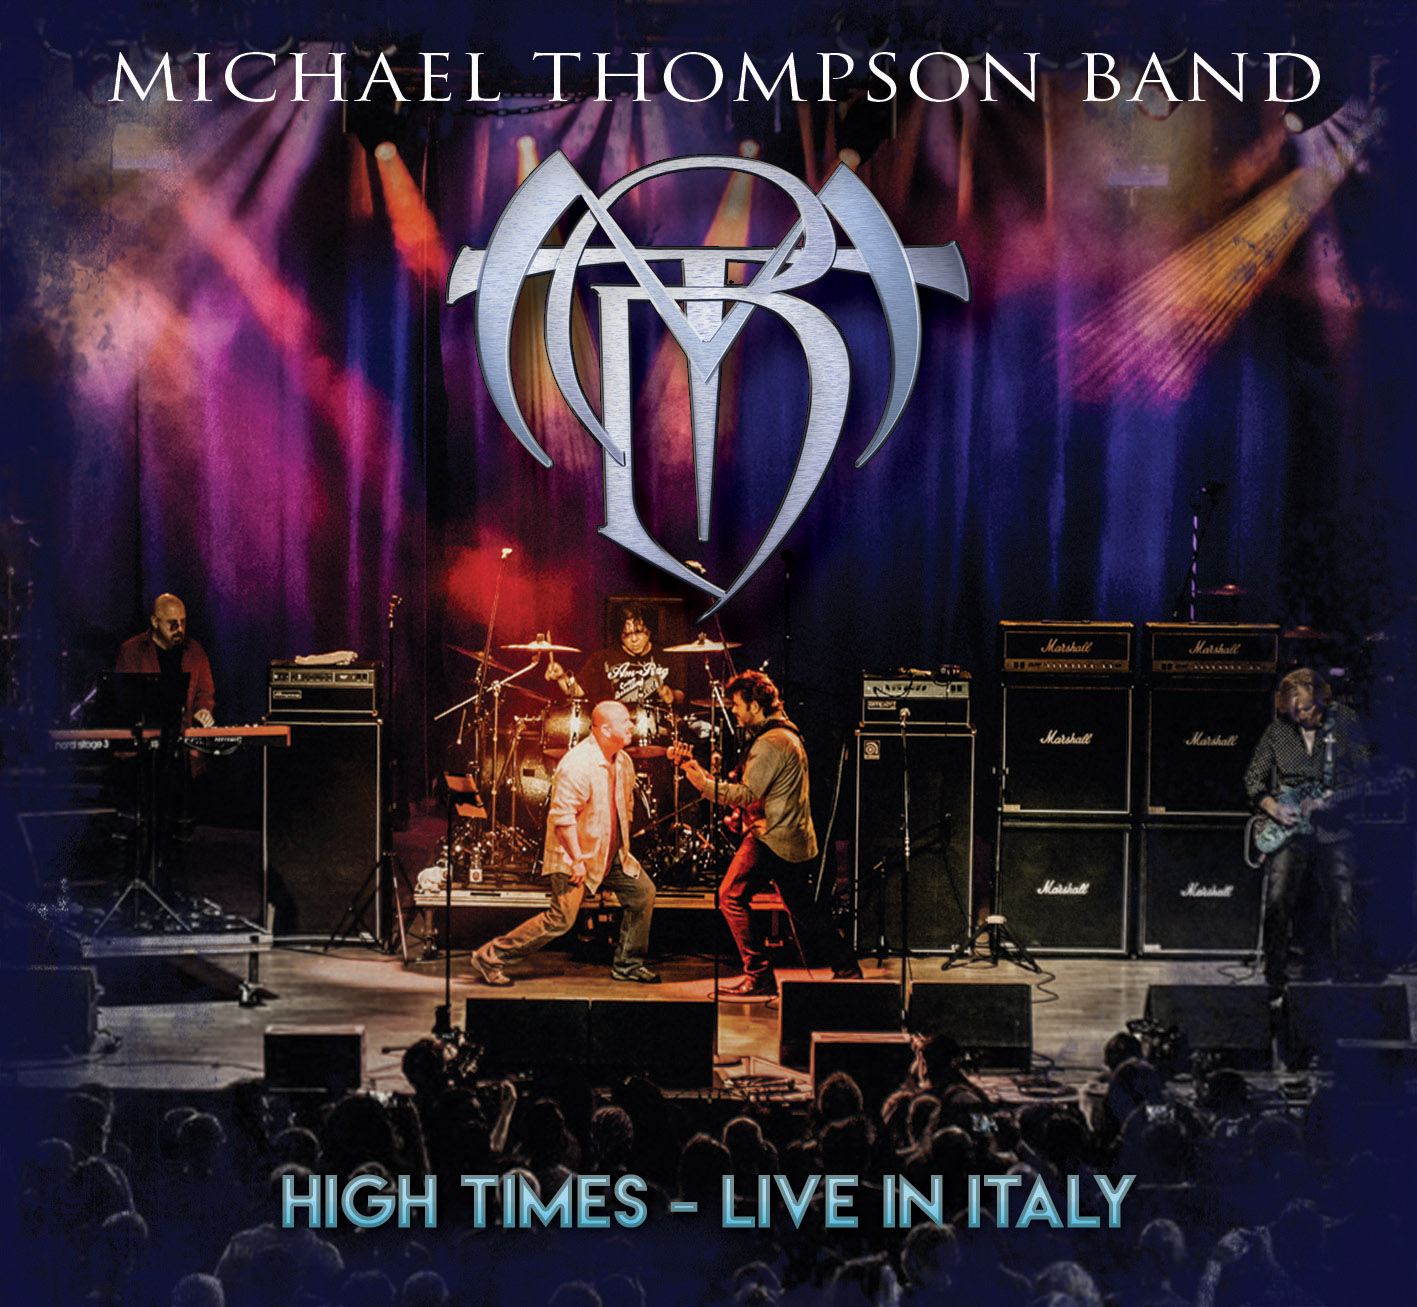 MICHAEL THOMPSON BAND - “High Times - Live In Italy”